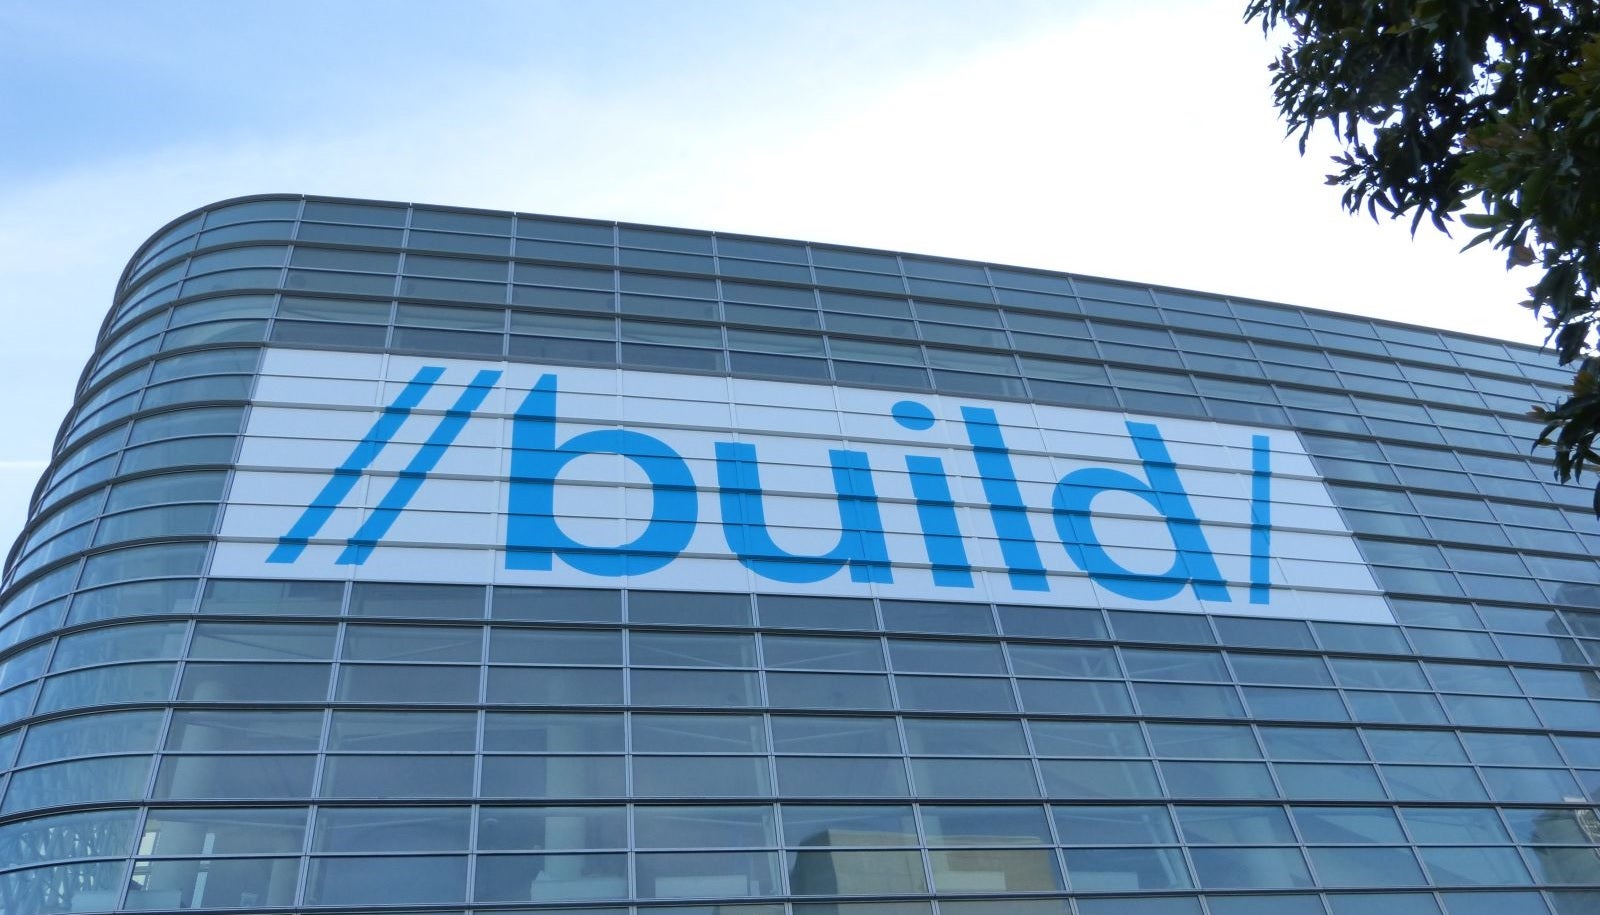 We are at Build 2015